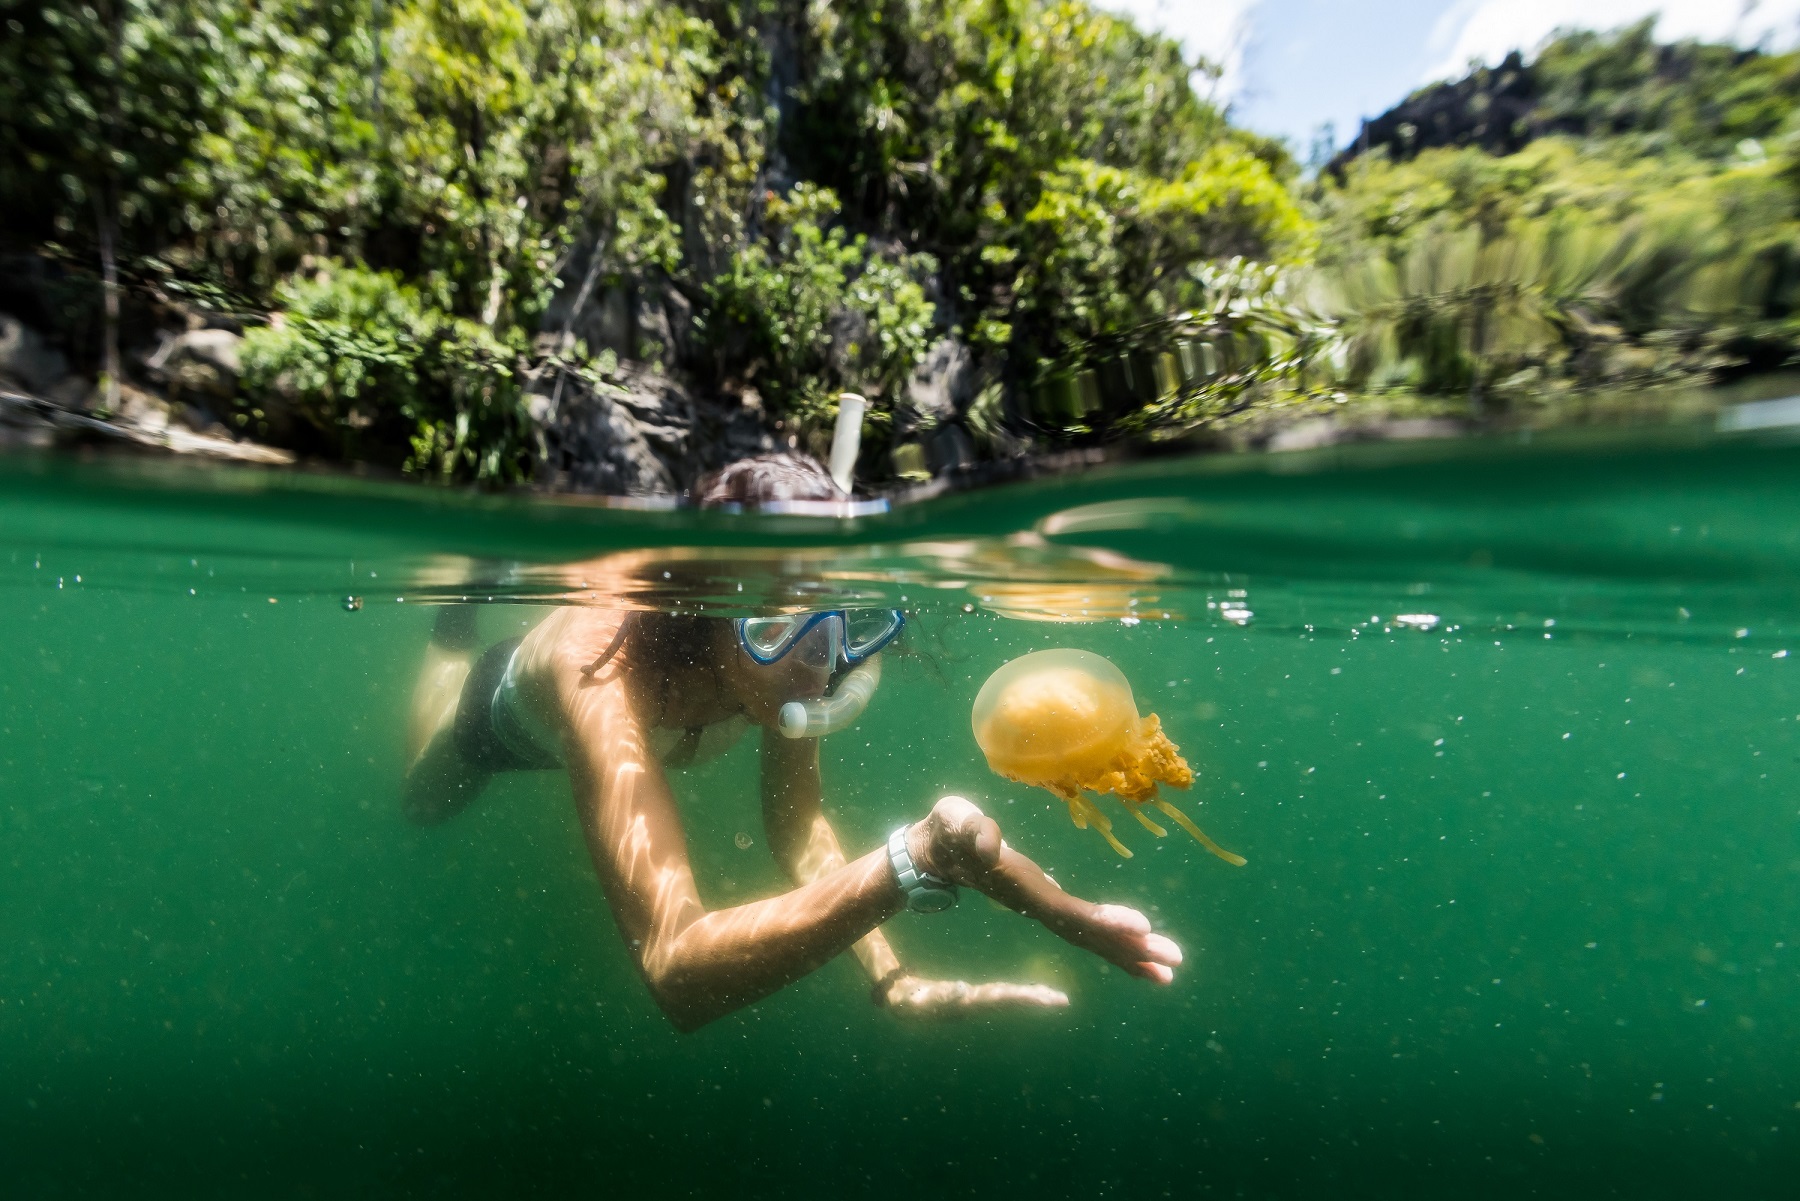 Snorkelling with jellyfish in Lake Misoo, Indonesia